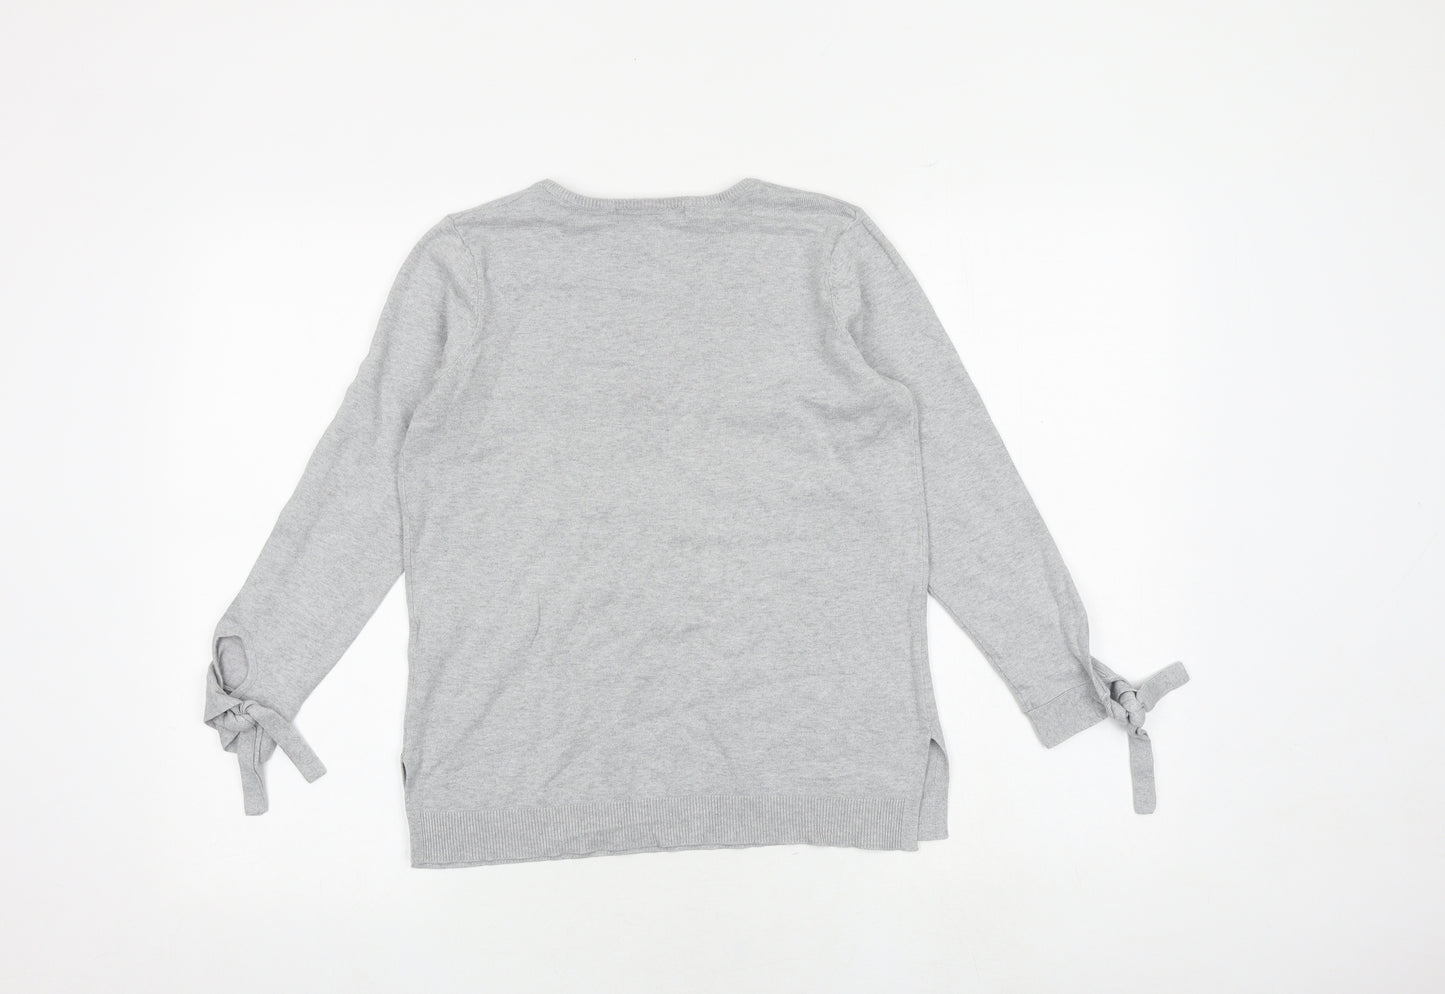 Very Womens Grey V-Neck Cotton Pullover Jumper Size 10